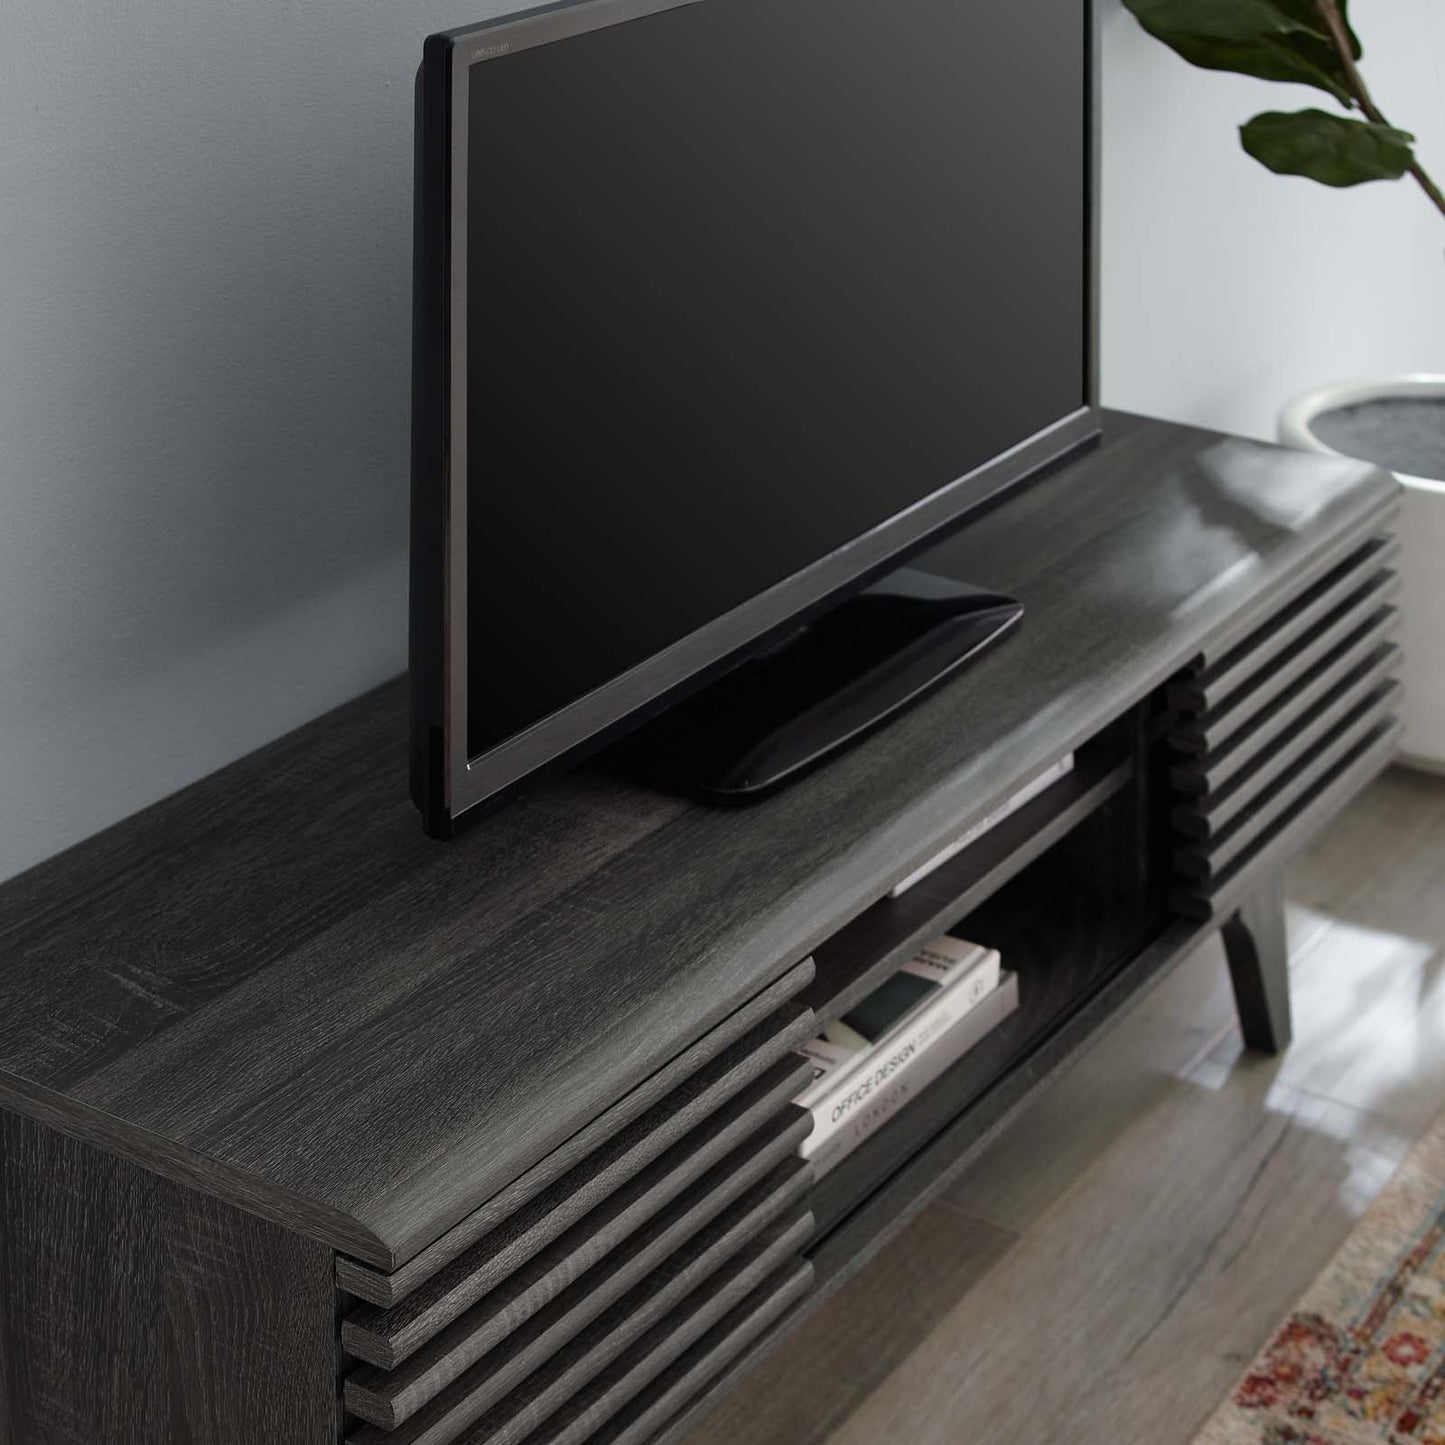 Render 46" Media Console TV Stand Charcoal EEI-3837-CHA